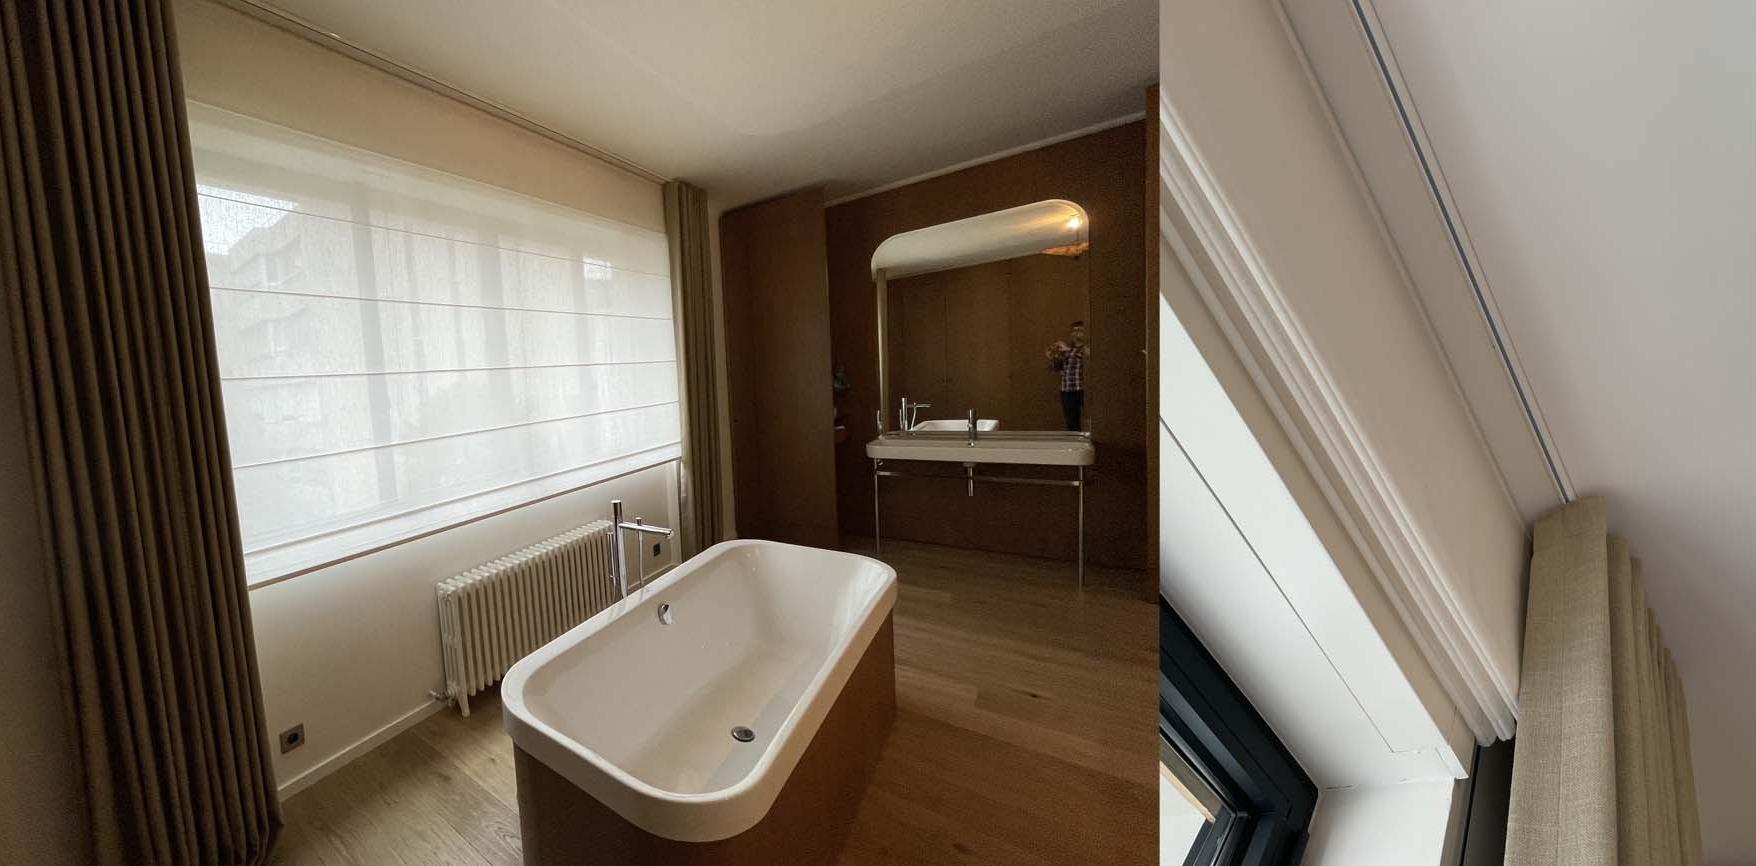 In the main bathroom, the very large window is covered with a roman blind and a pair of curtains.